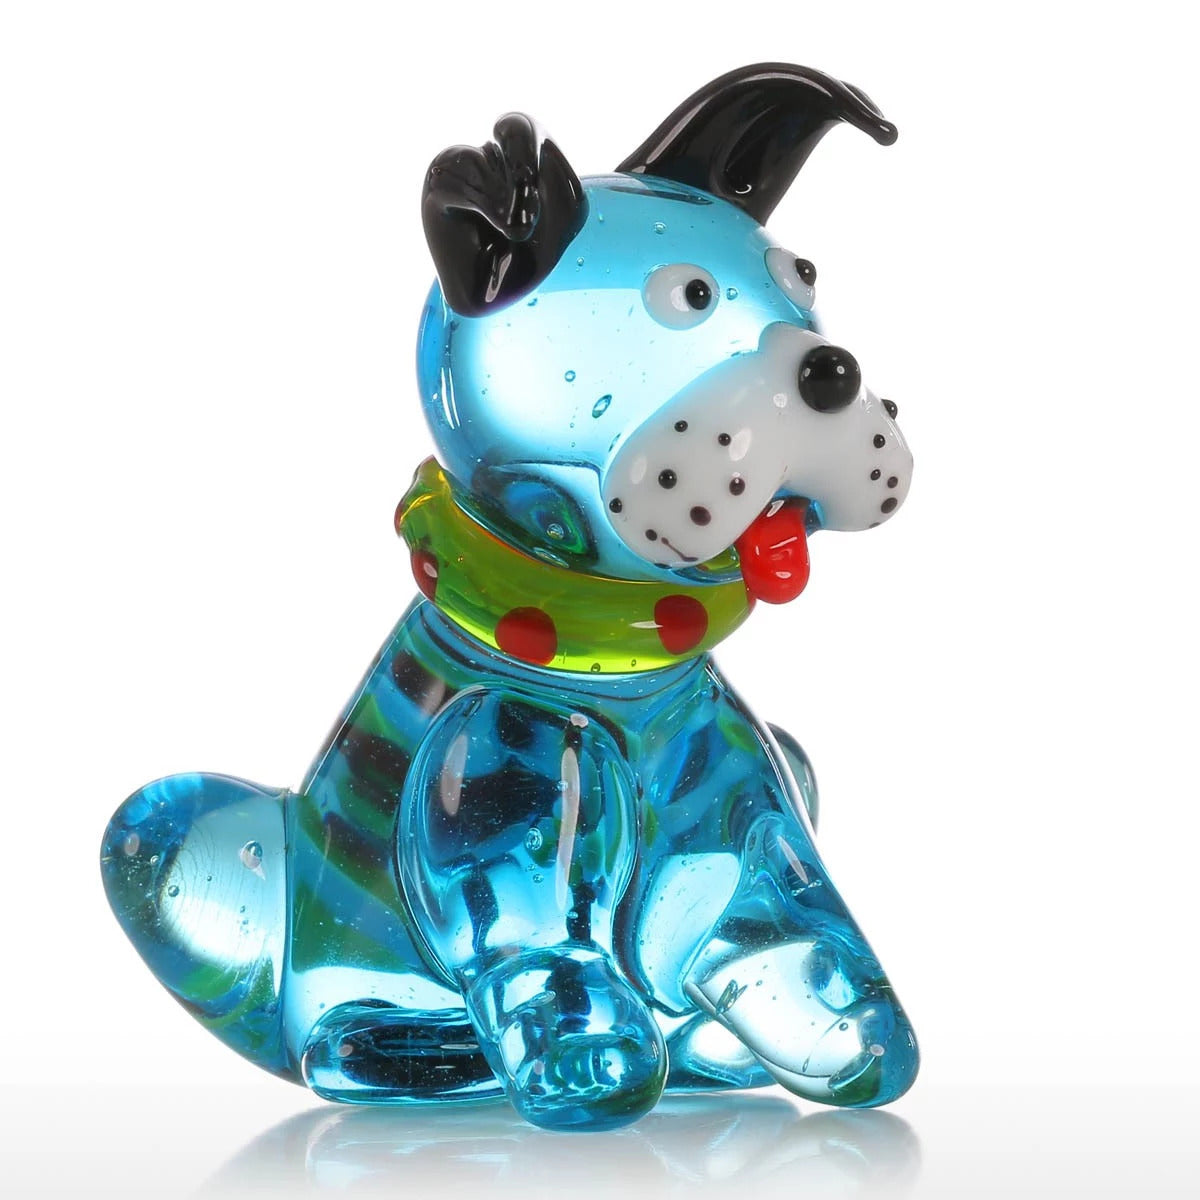 Blown Glass Ornaments with Glass Dog Sculpture Figurines